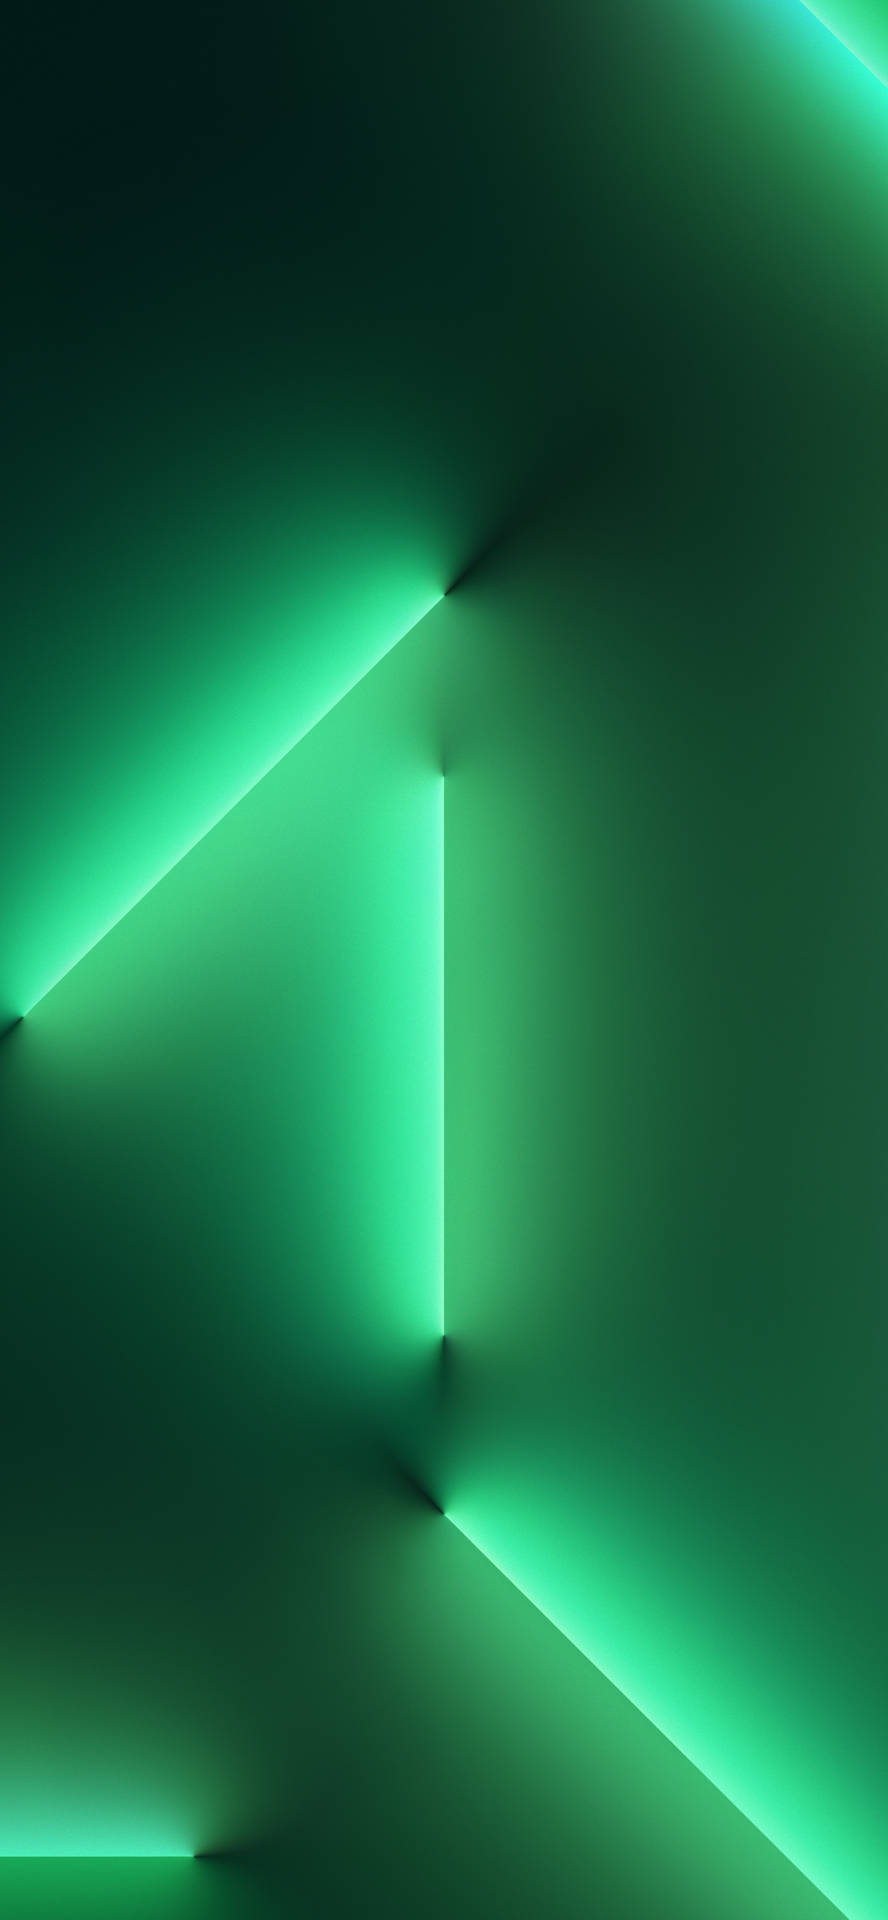 Neon Lights On A Wall Green Iphone